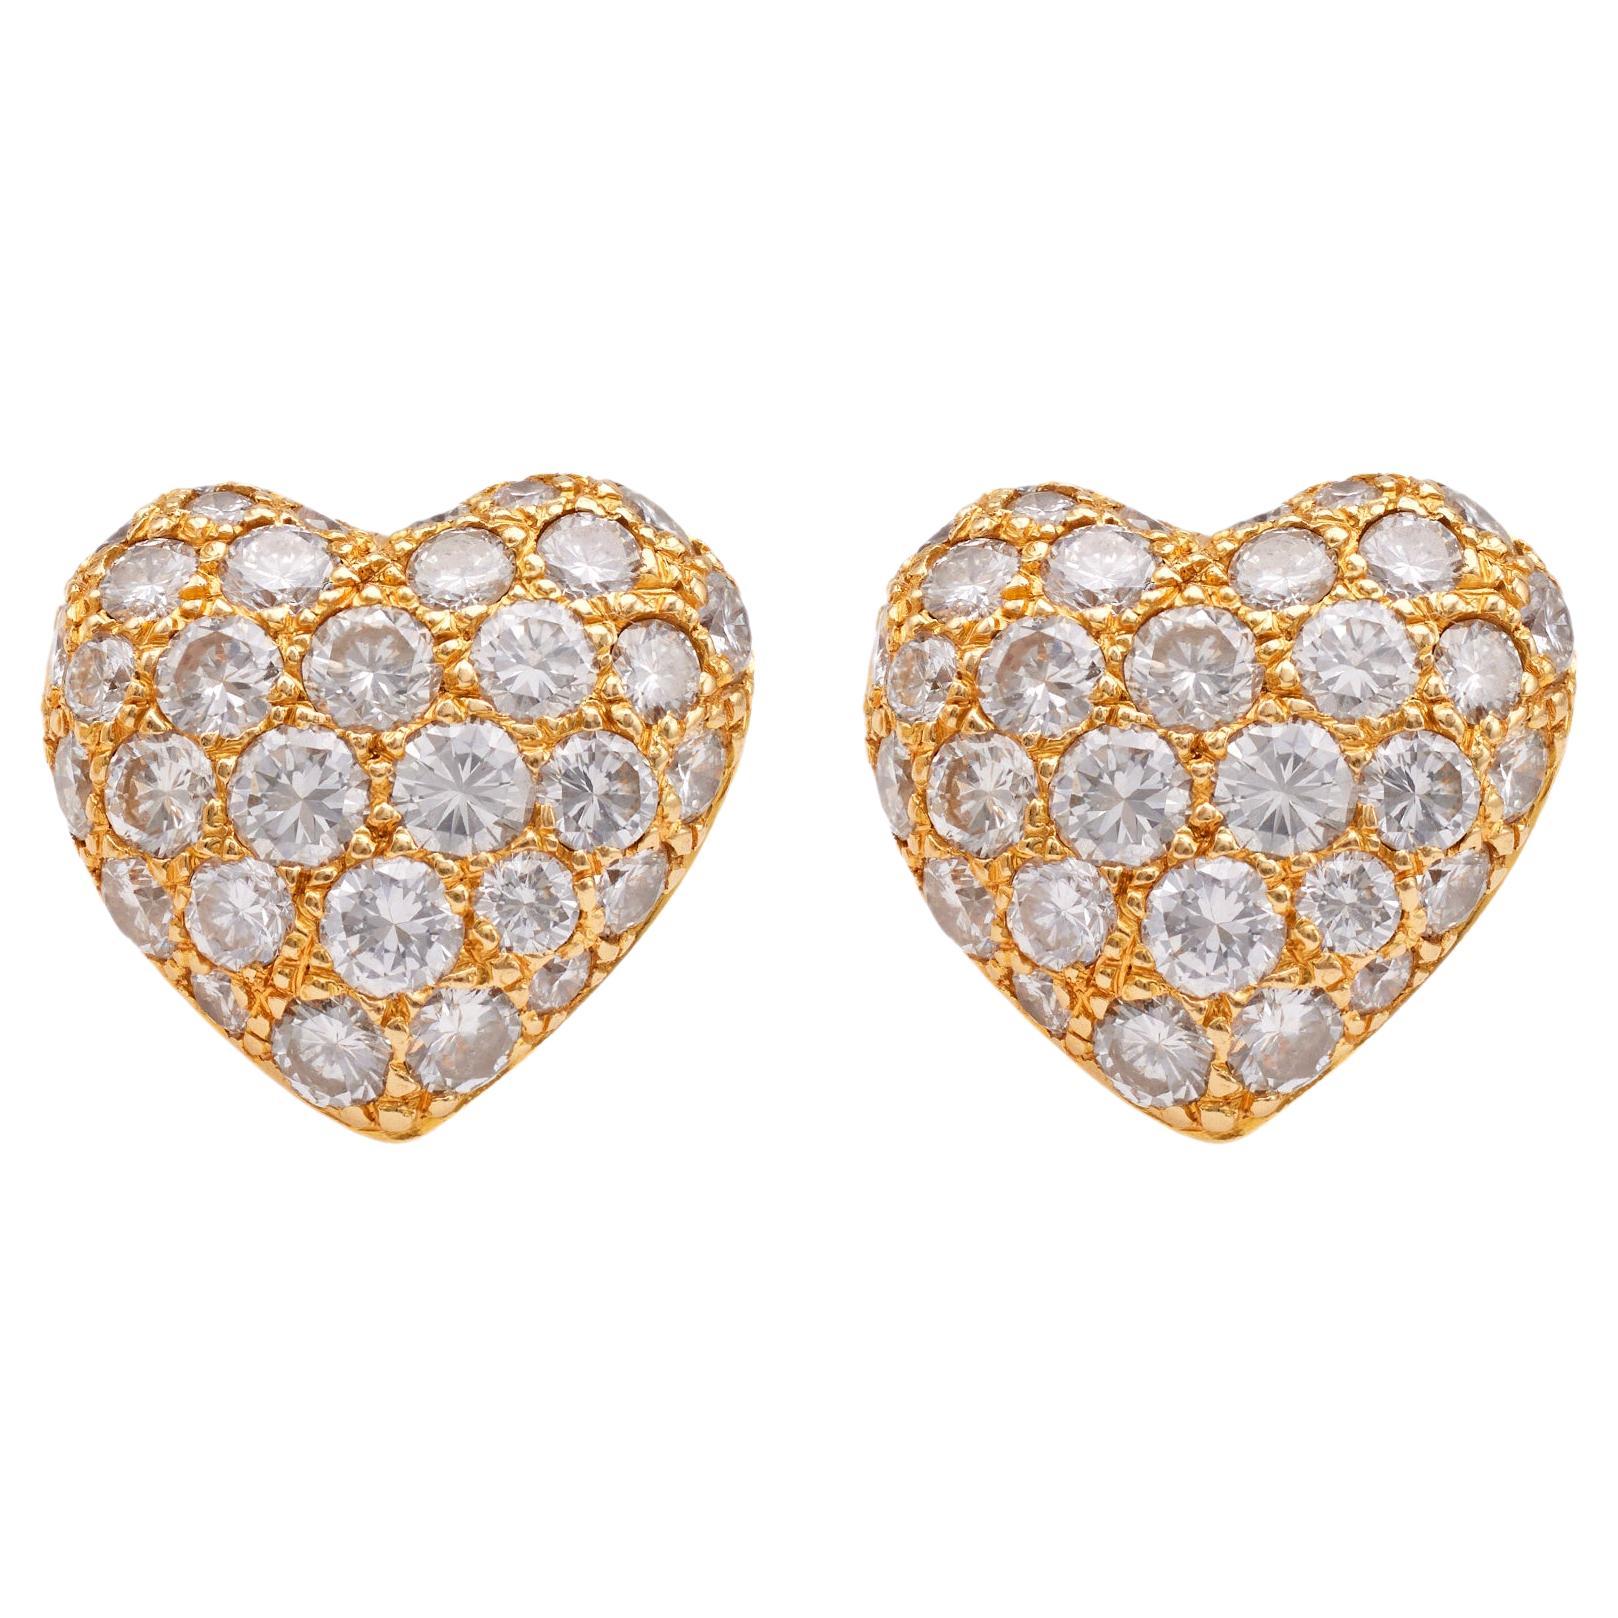 Pair of Cartier 1.20 Carat Total Weight Diamond 18k Gold Heart Stud Earrings For Sale